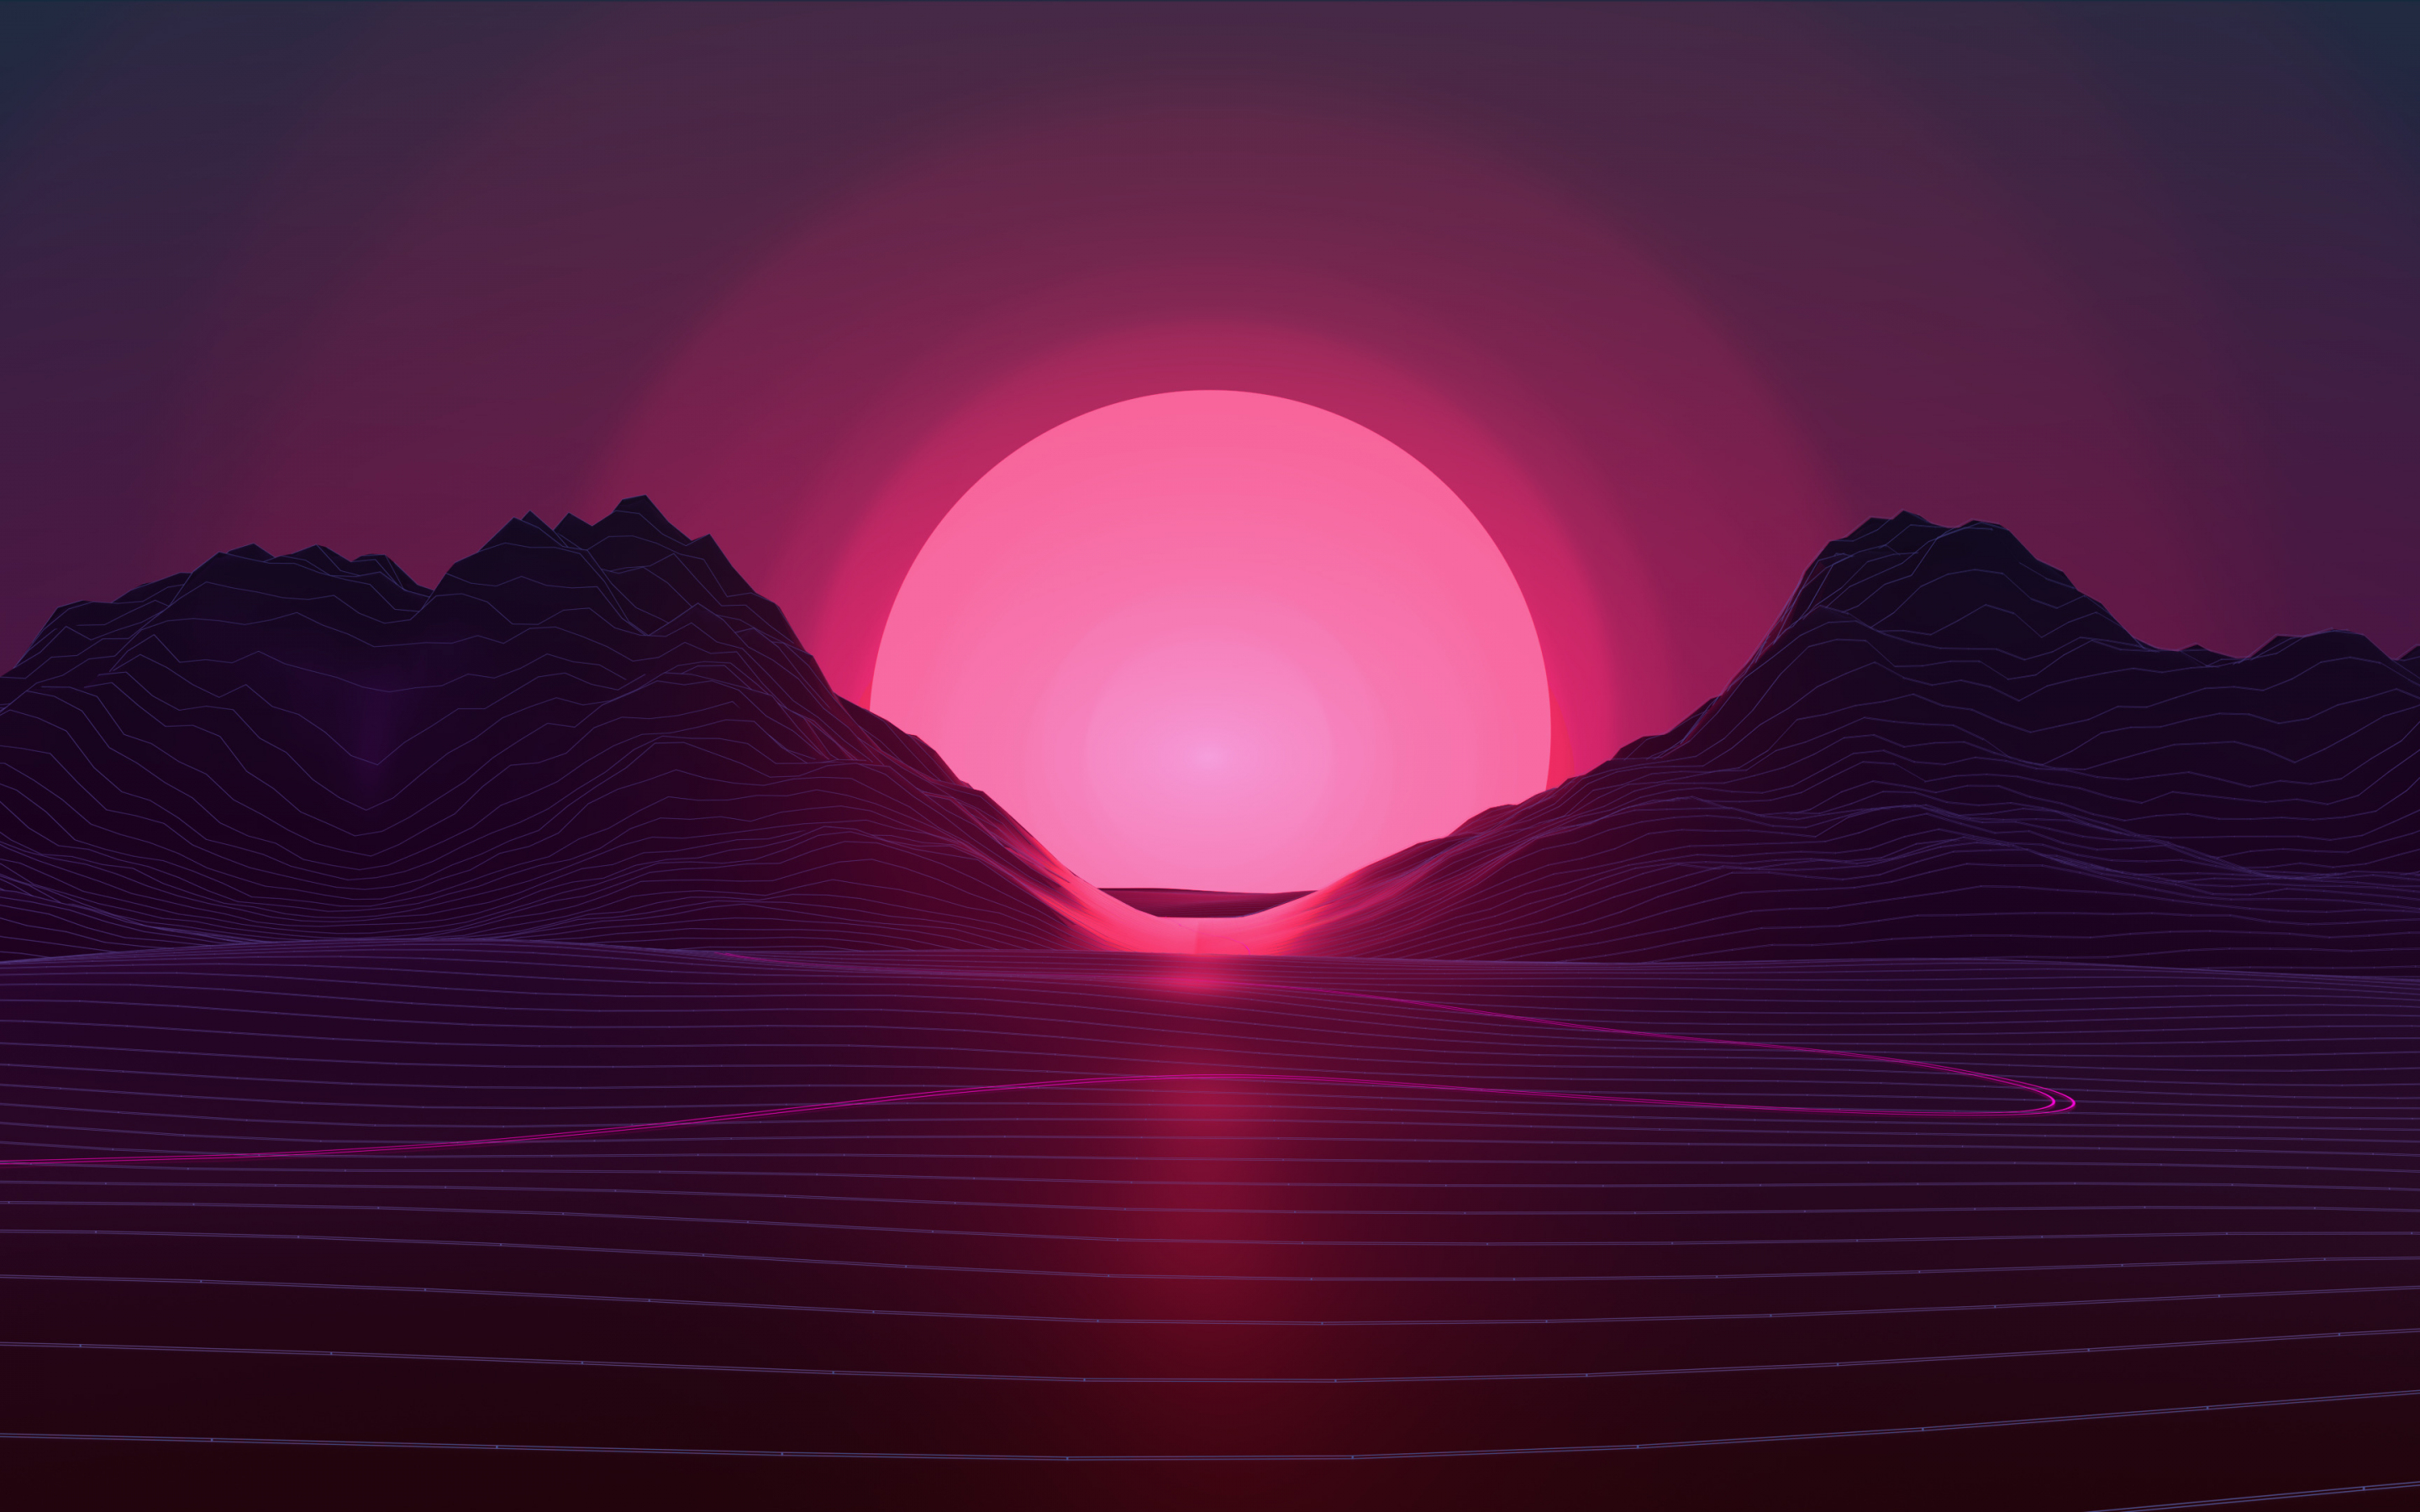 Sunset, mountains, neon pink, abstract, 2880x1800 wallpaper